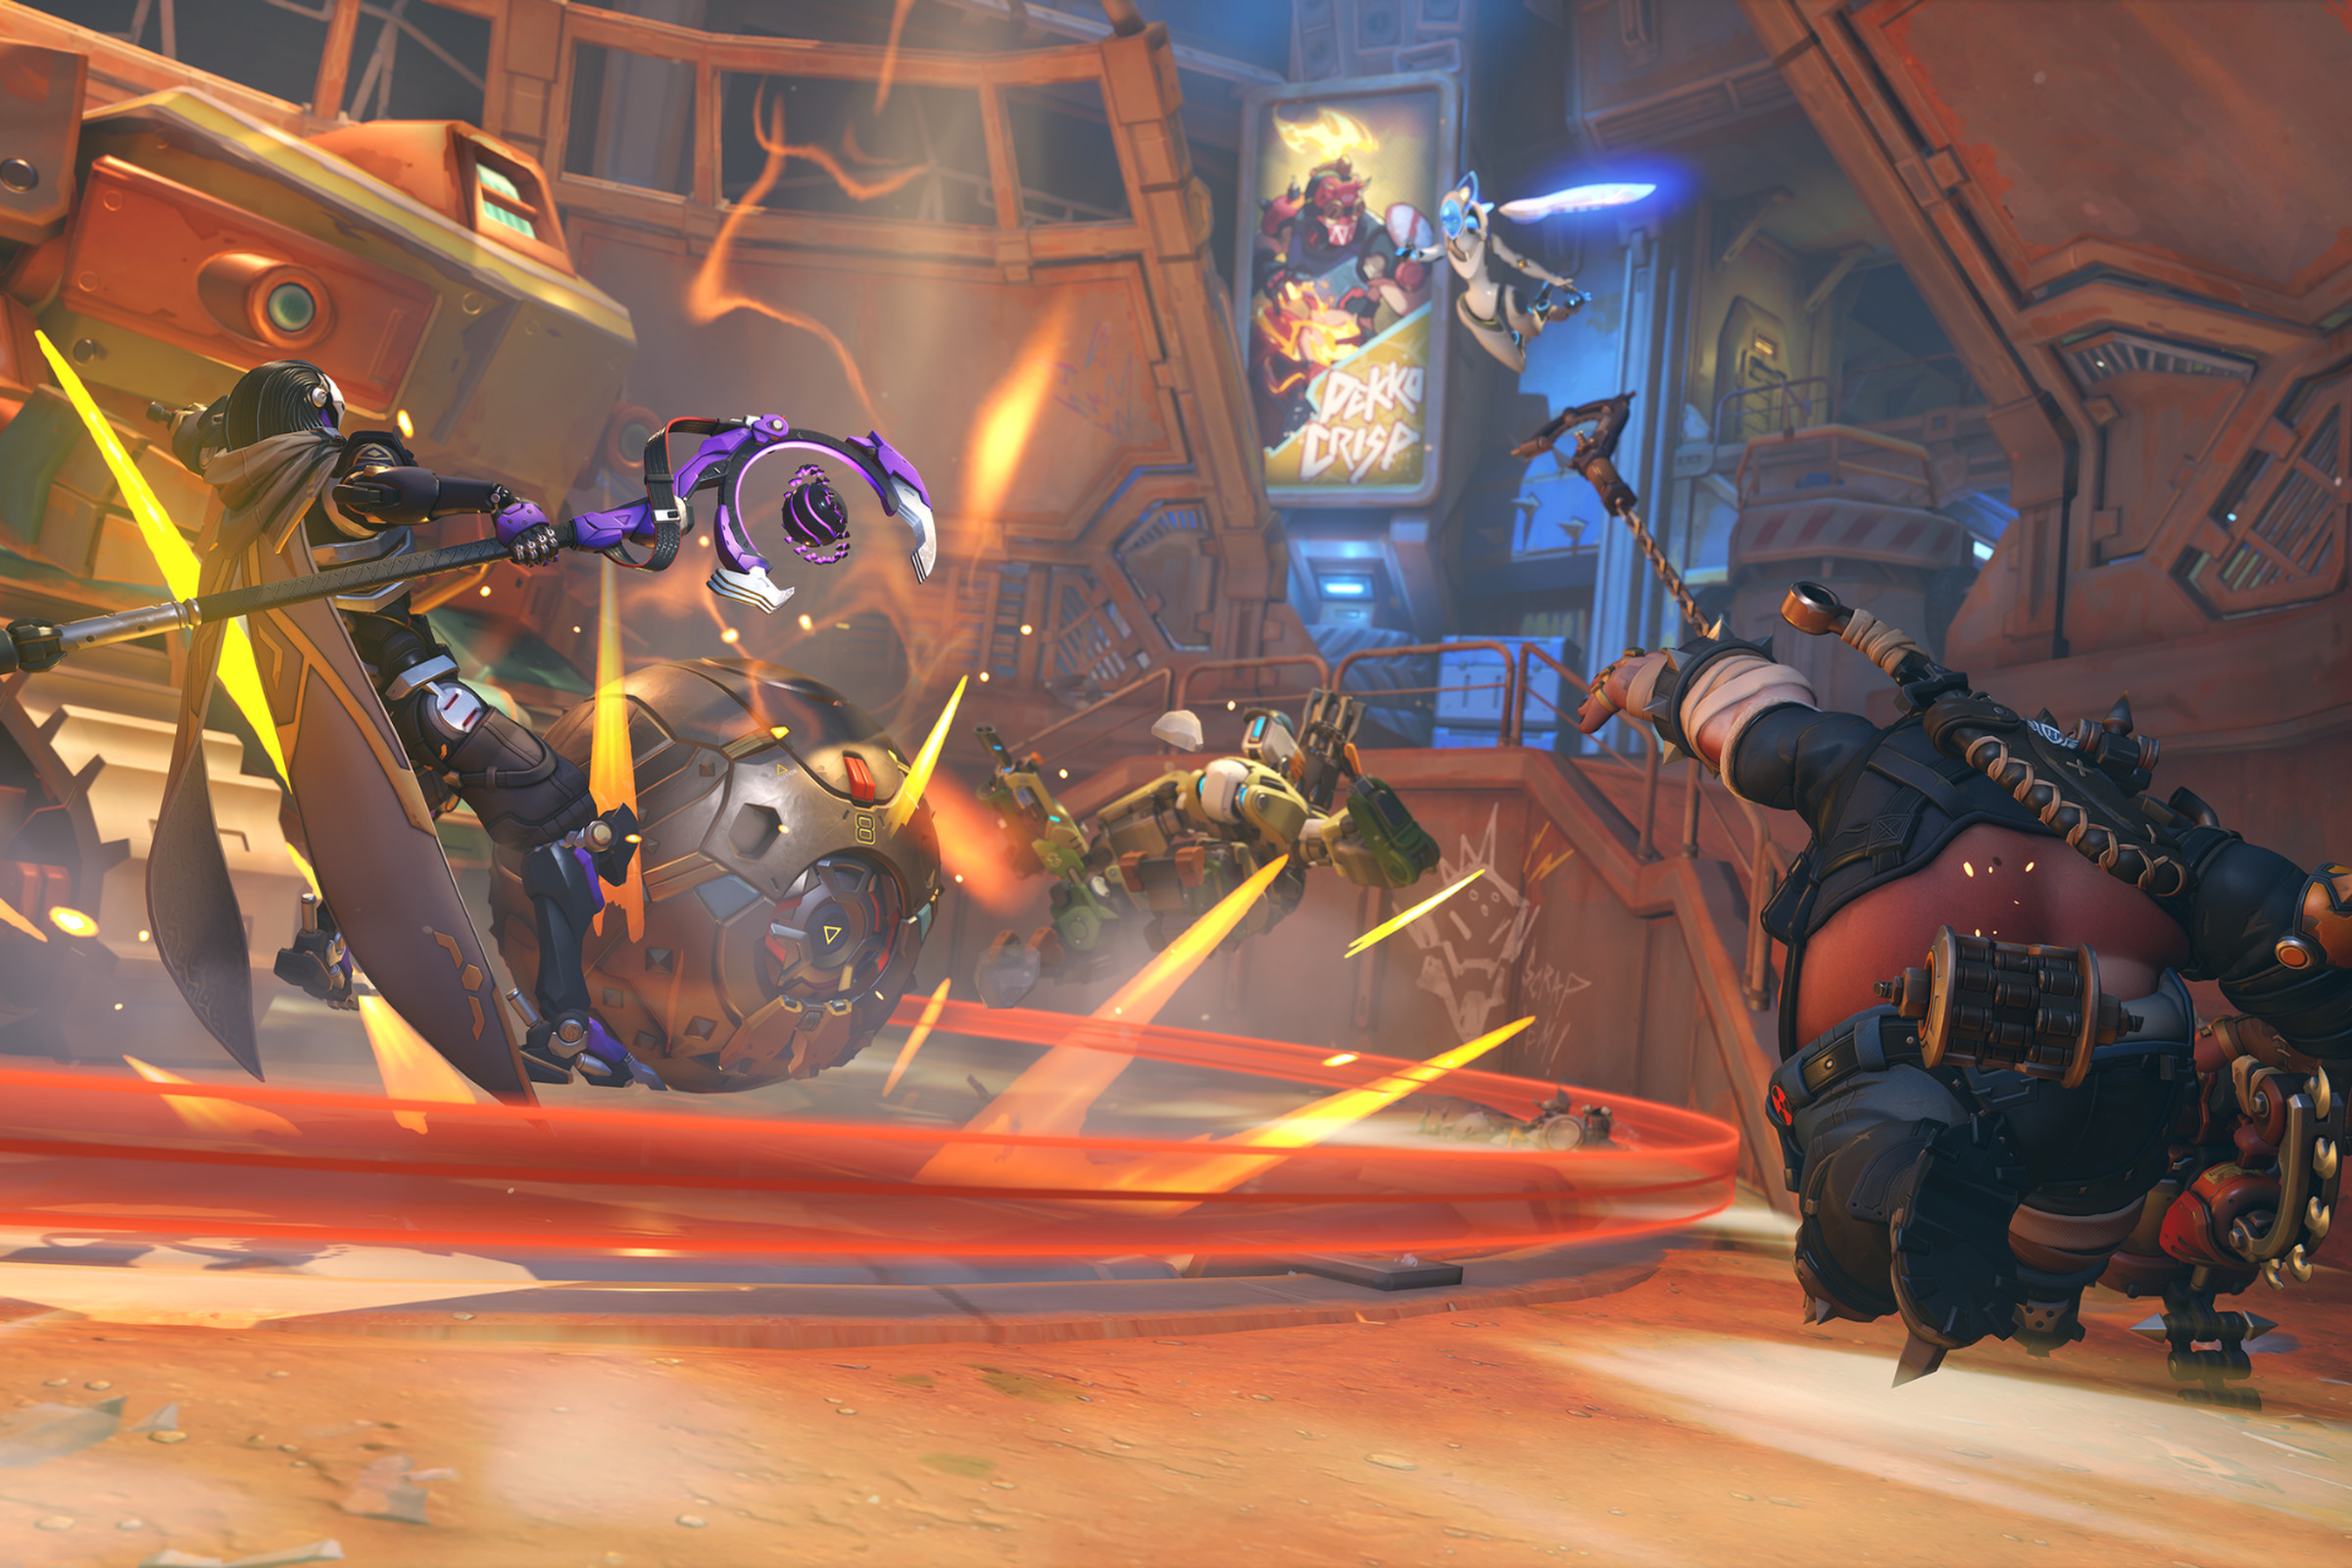 Screenshot from Overwatch 2 featuring a team fight in the new Flashpoint map New Junk City including the heroes Wrecking Ball, Ramattra, Echo, Roadhog and Bastion fighting over a control point